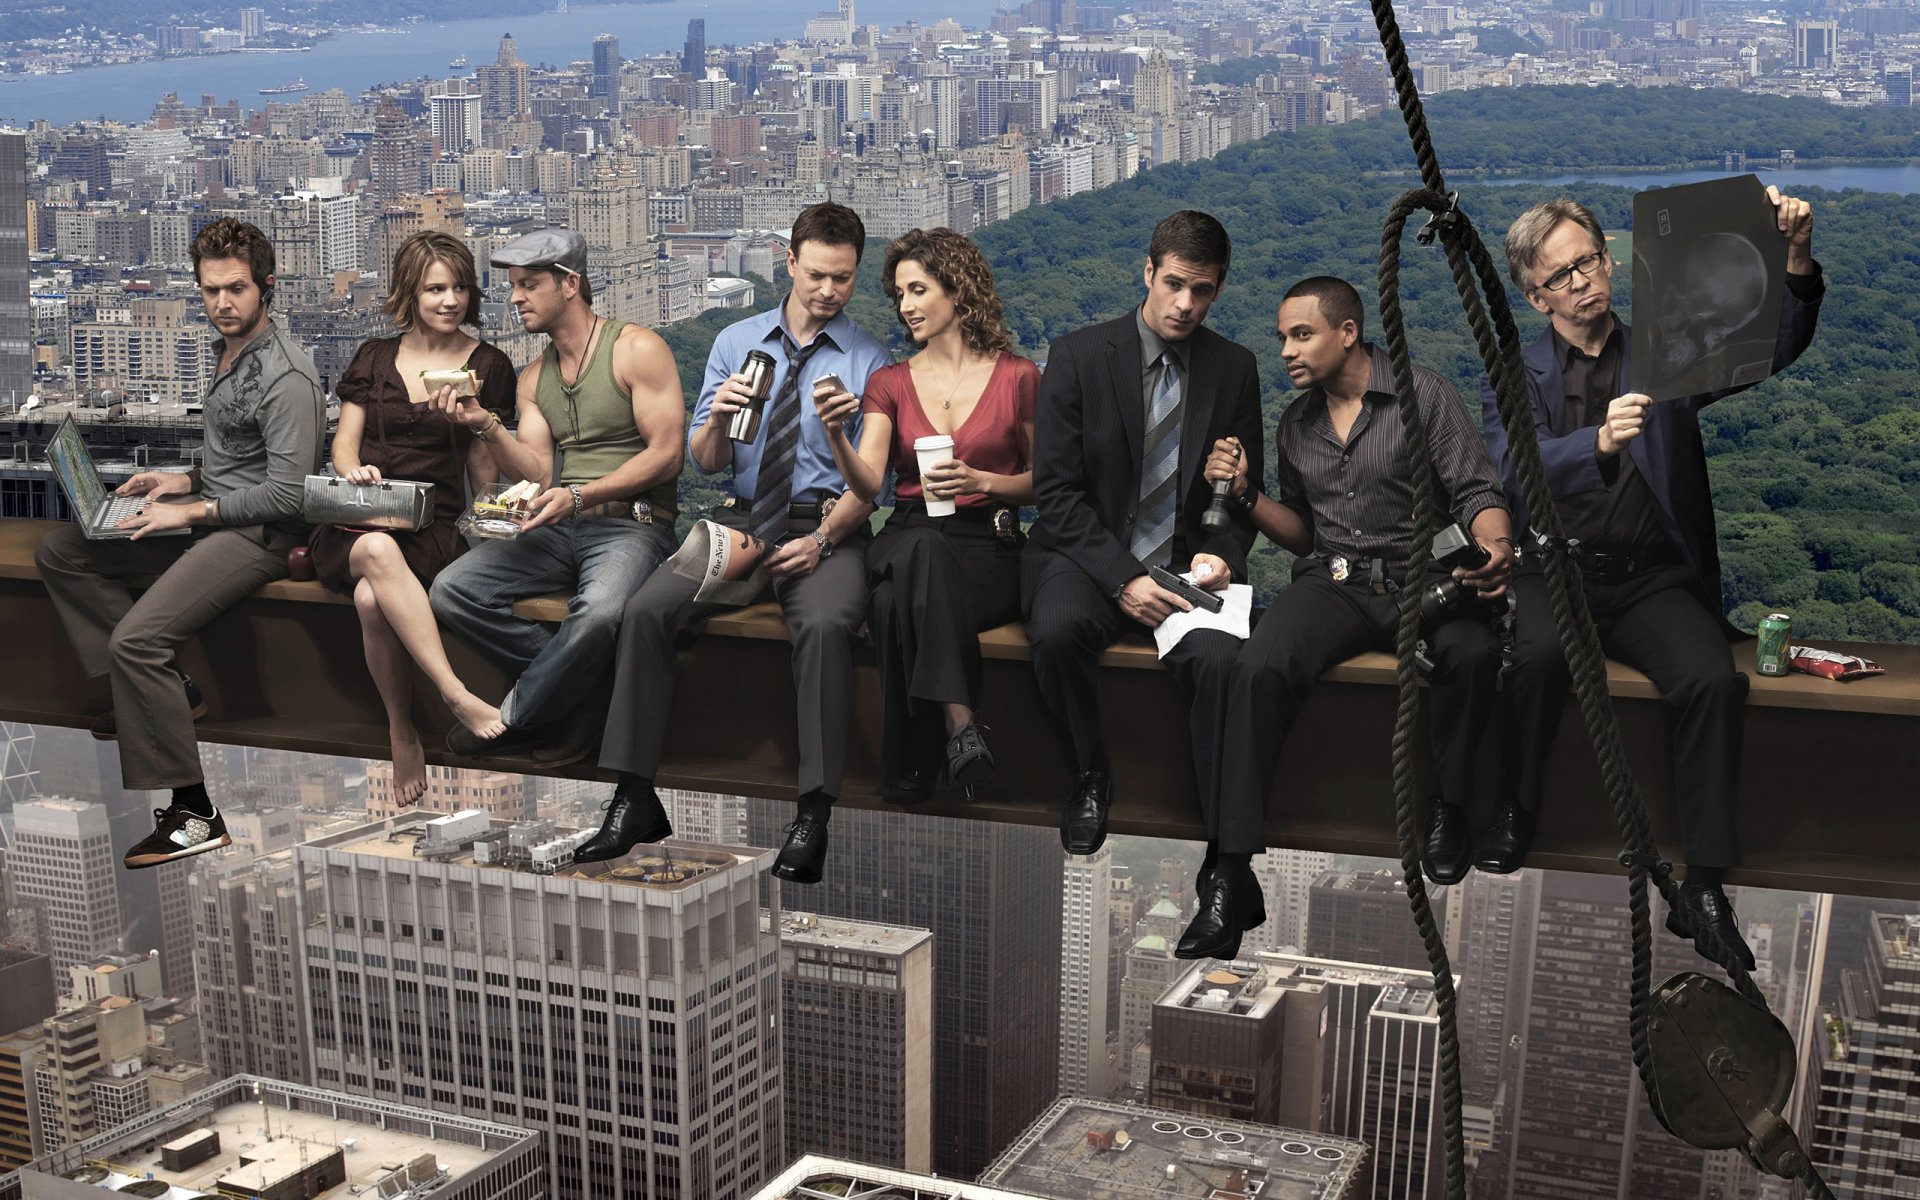 Csi ny season 8 torrent basic principles and calculations in chemical engineering torrent